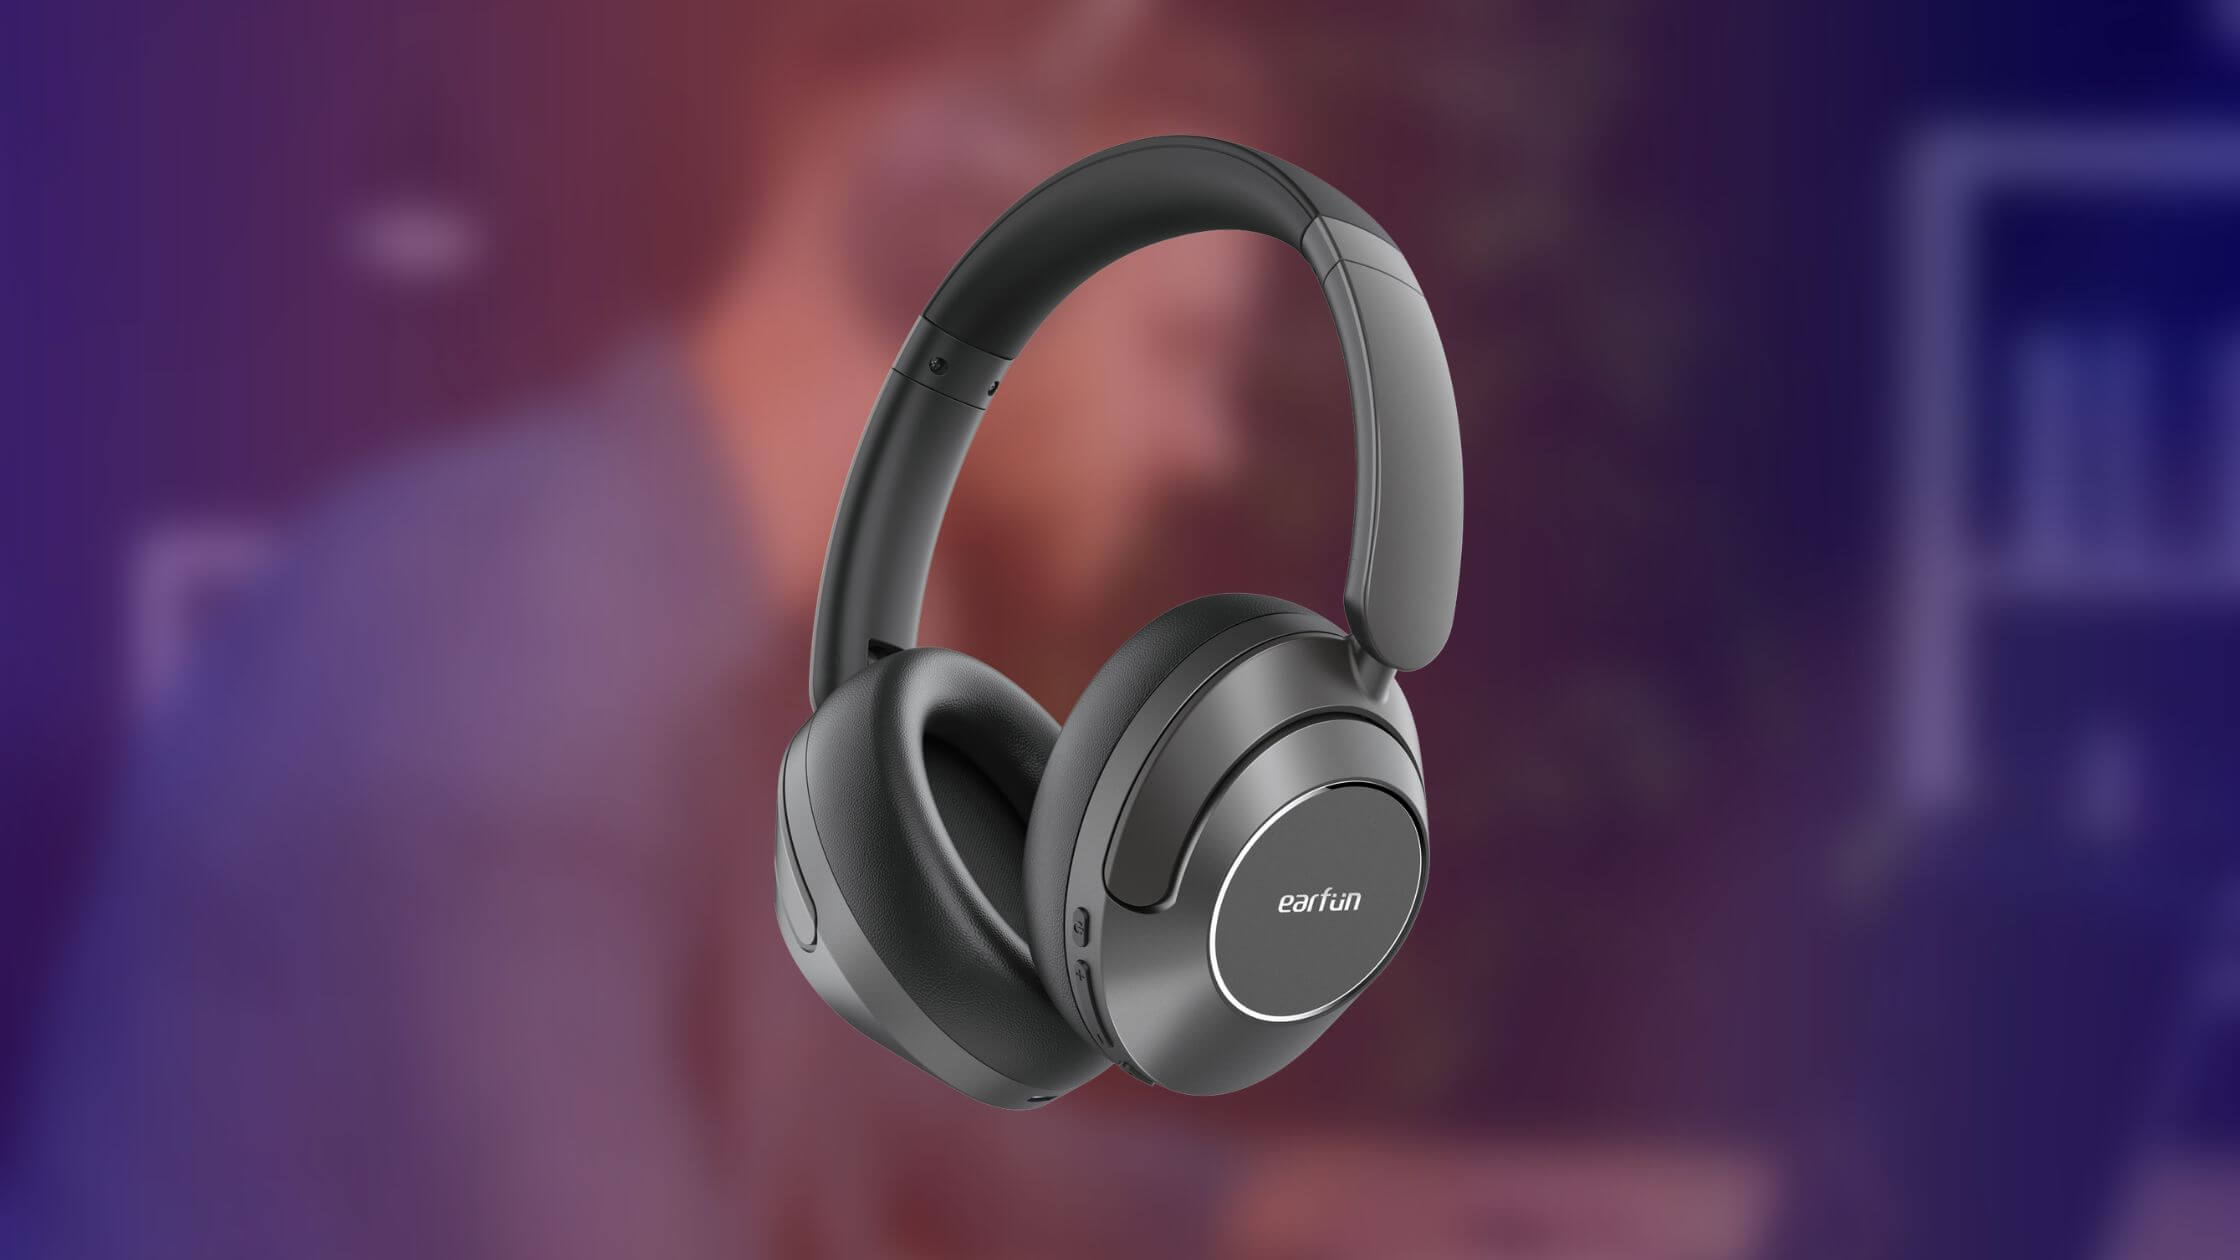 EarFun’s $80 headphones offer 80 hours of battery, high-res audio and ANC!